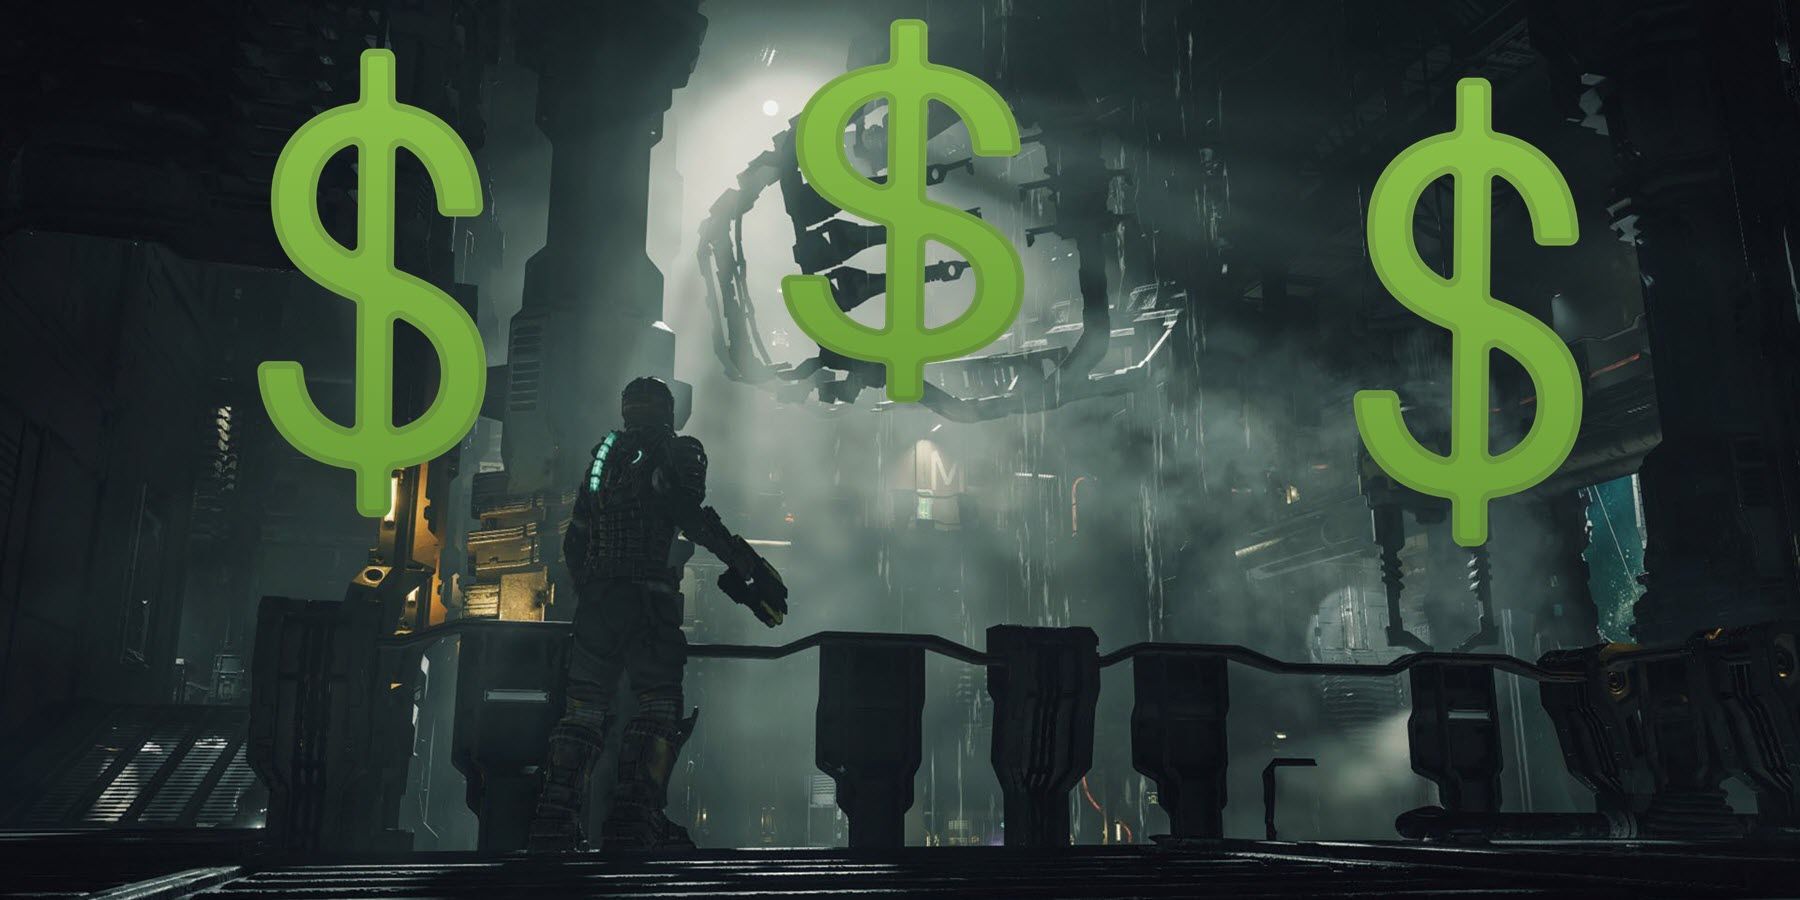 How to exploit Dead Space remake money glitch for infinite Nodes and  Credits